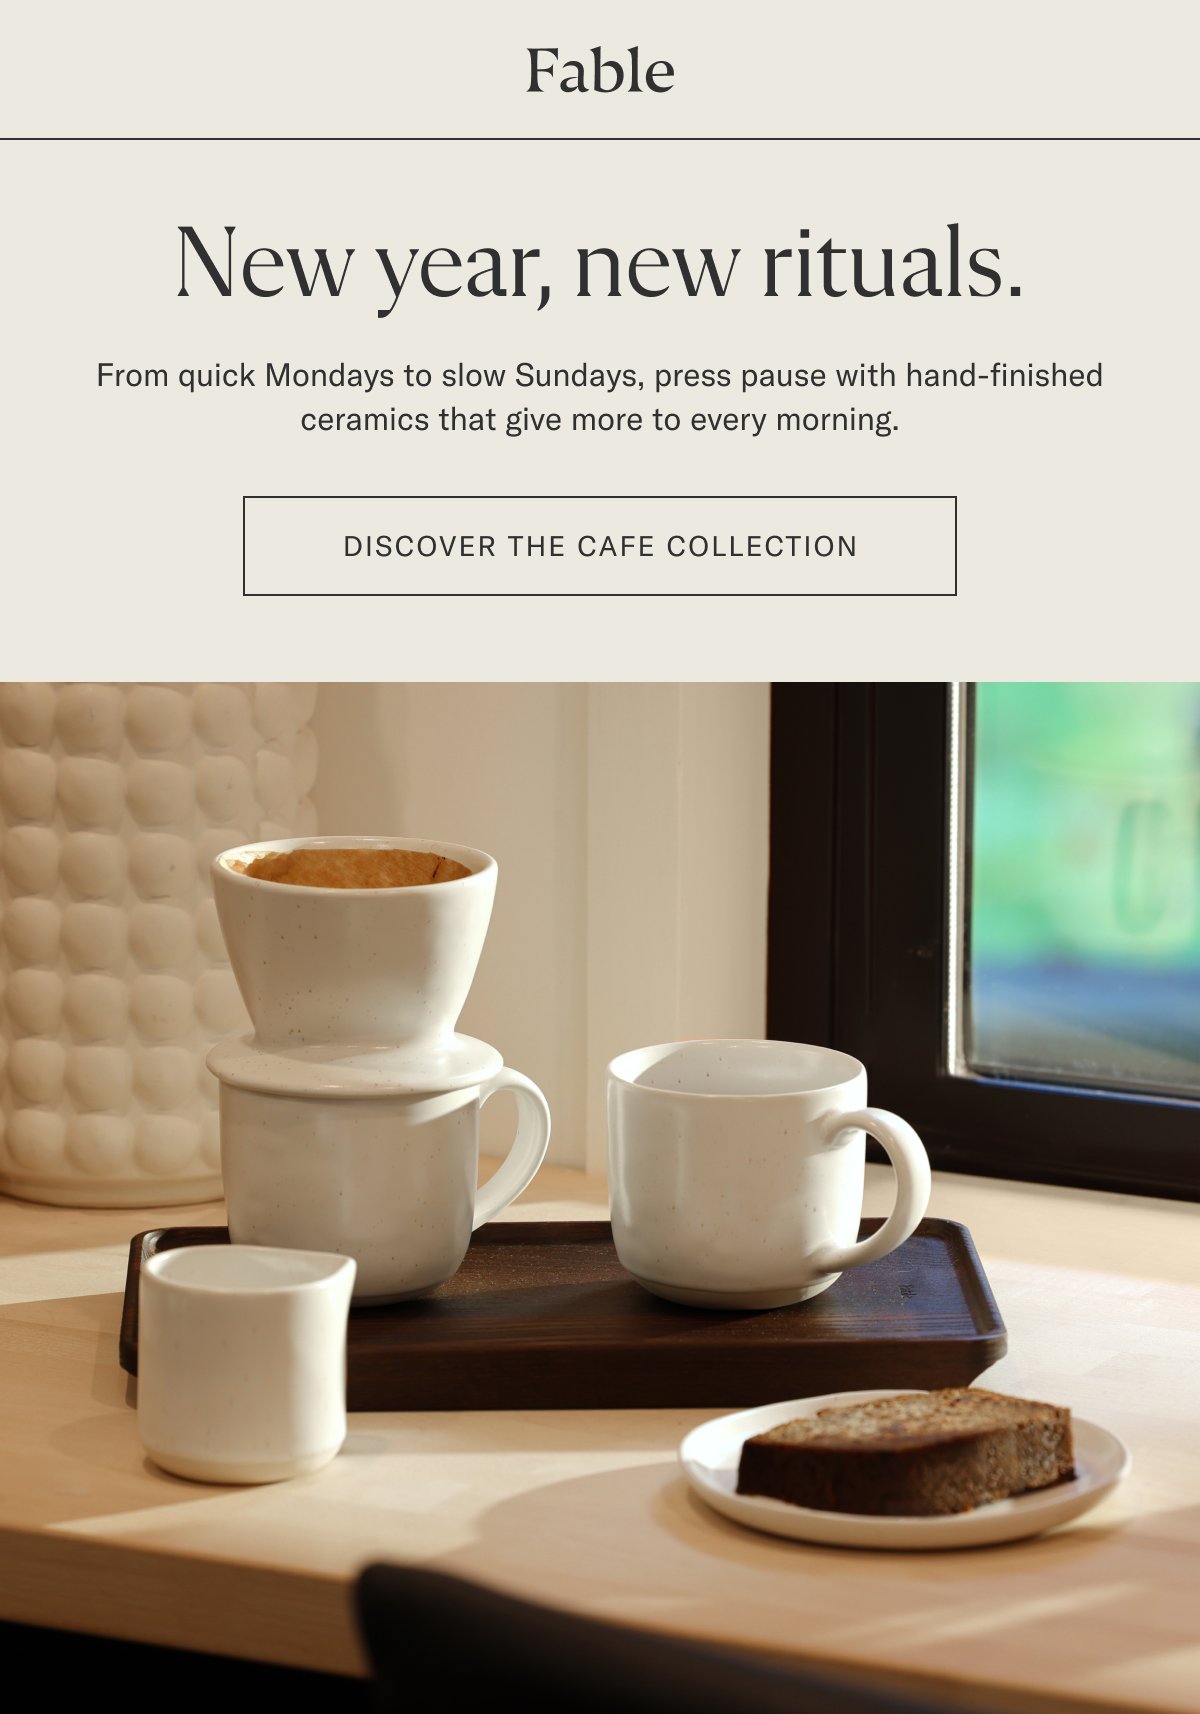 Discover the cafe collection